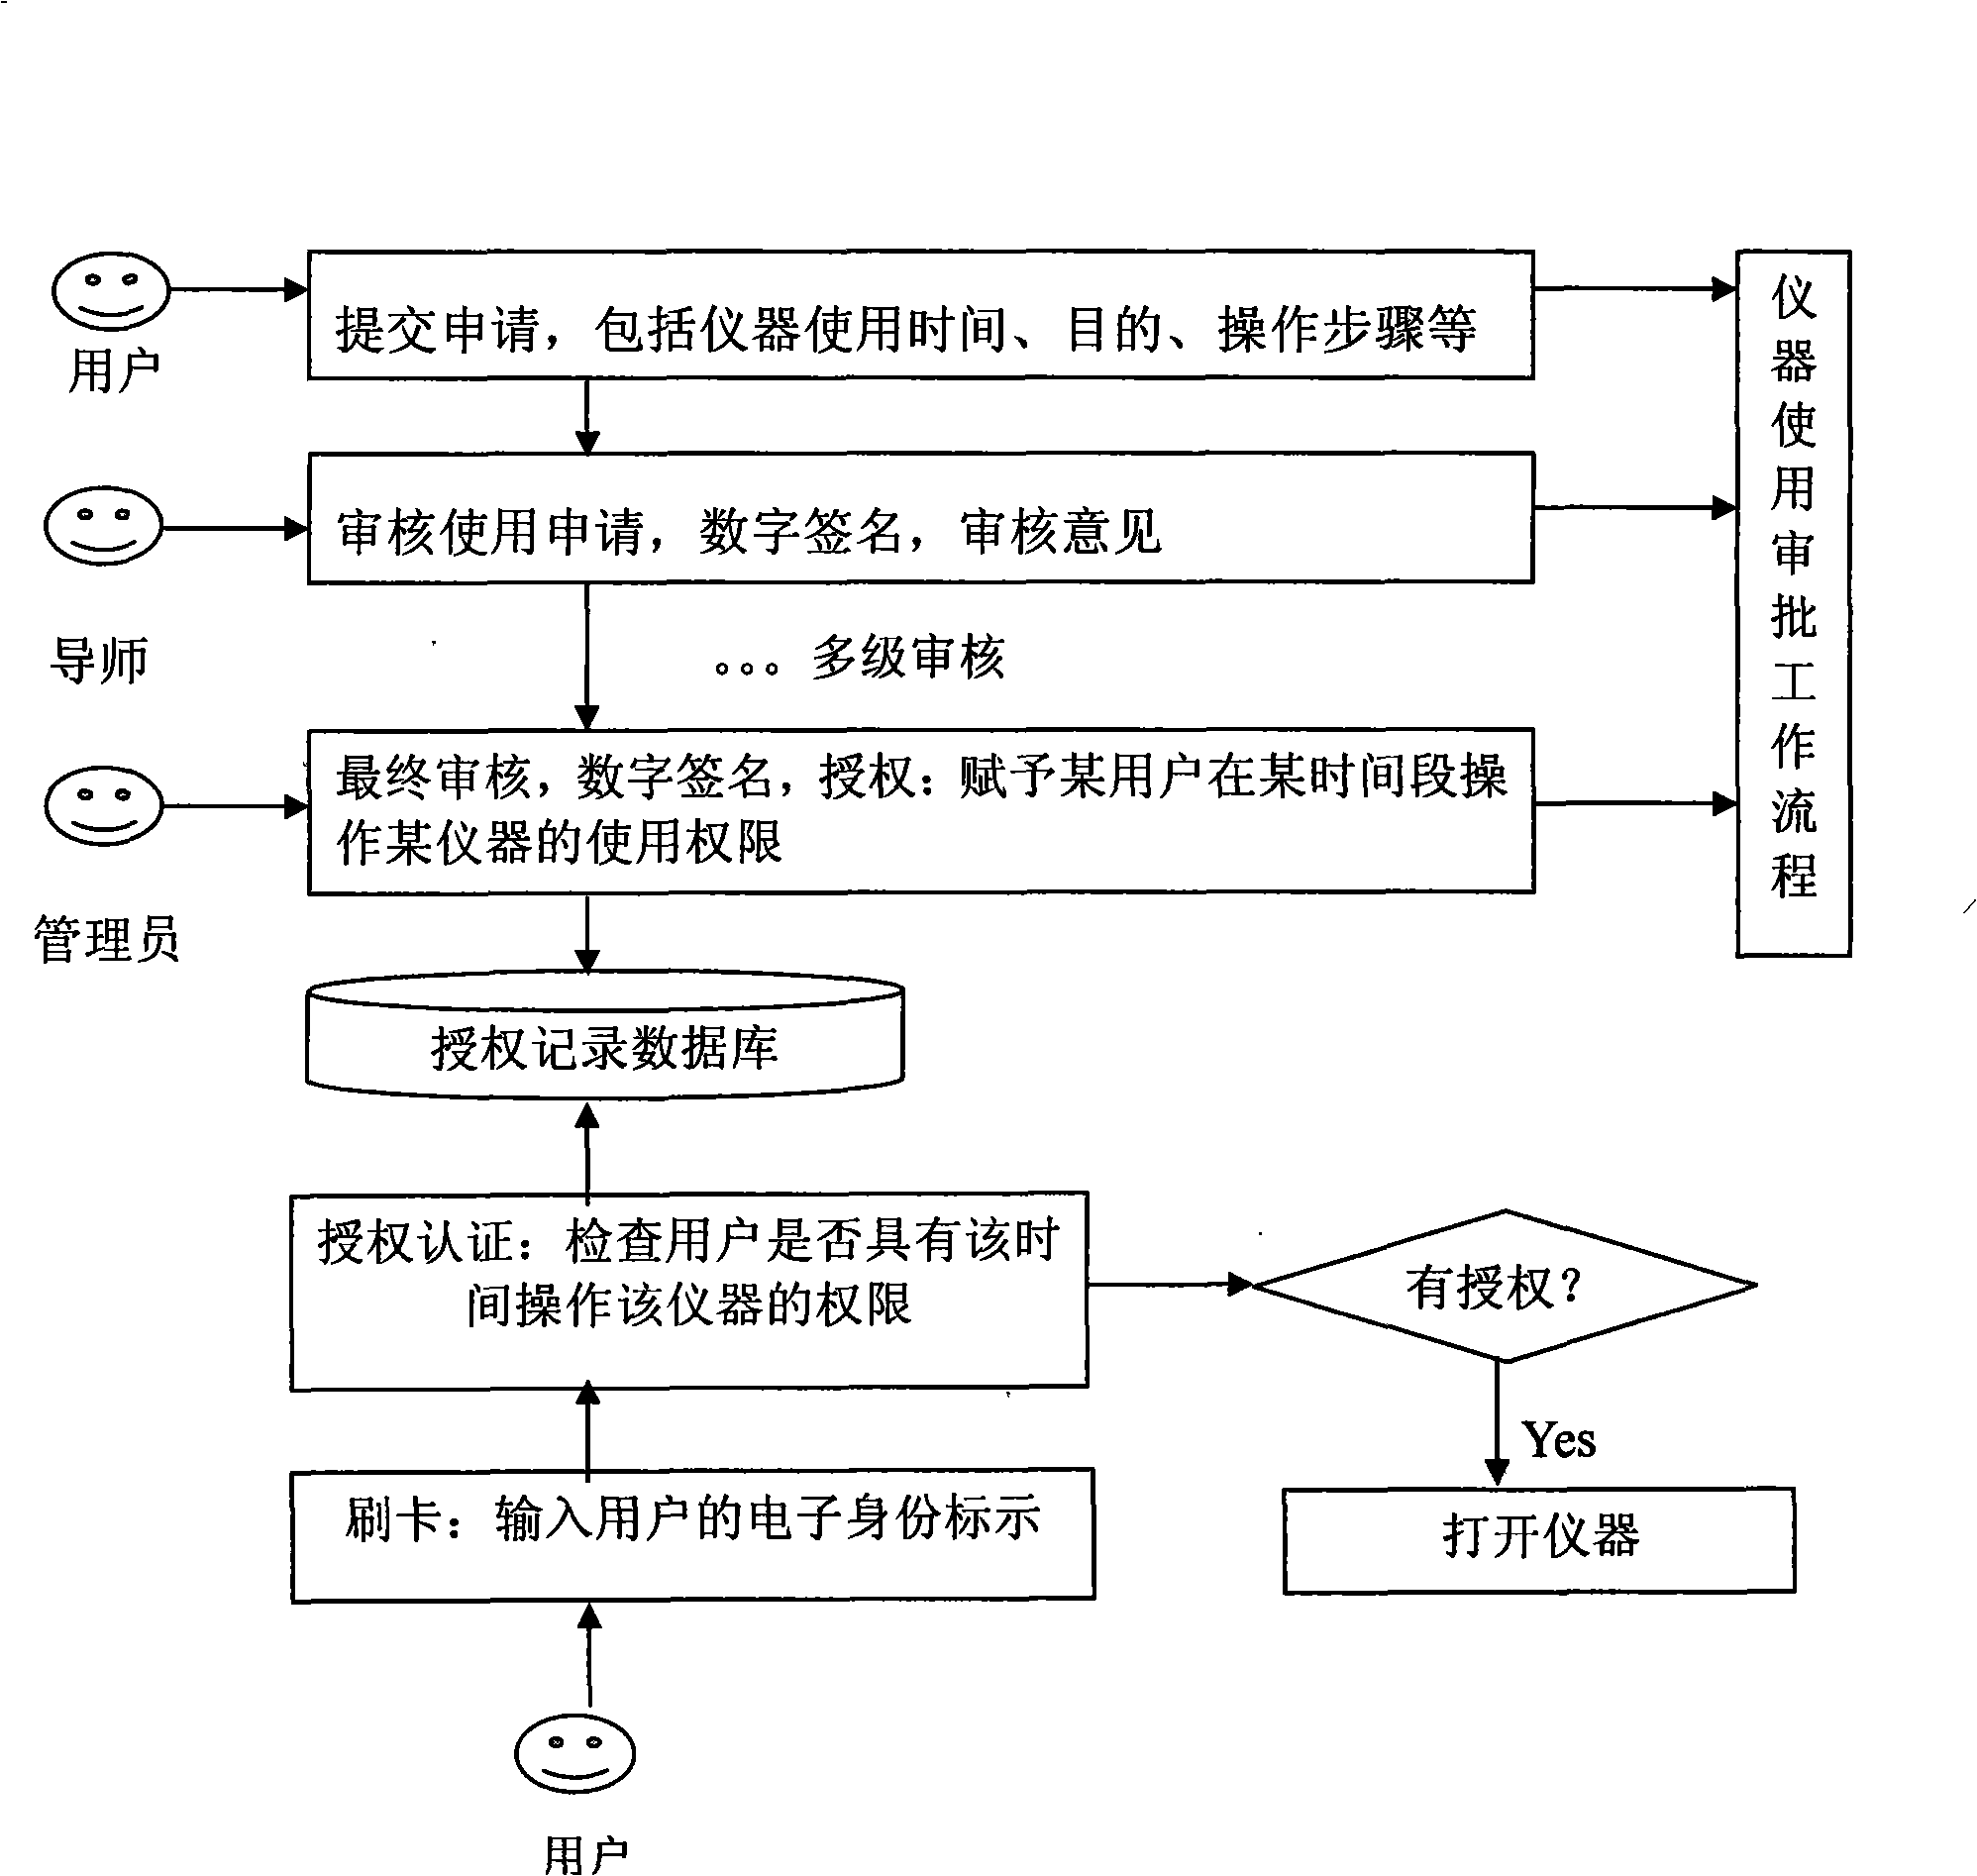 Authorization and management system for laboratory instrument